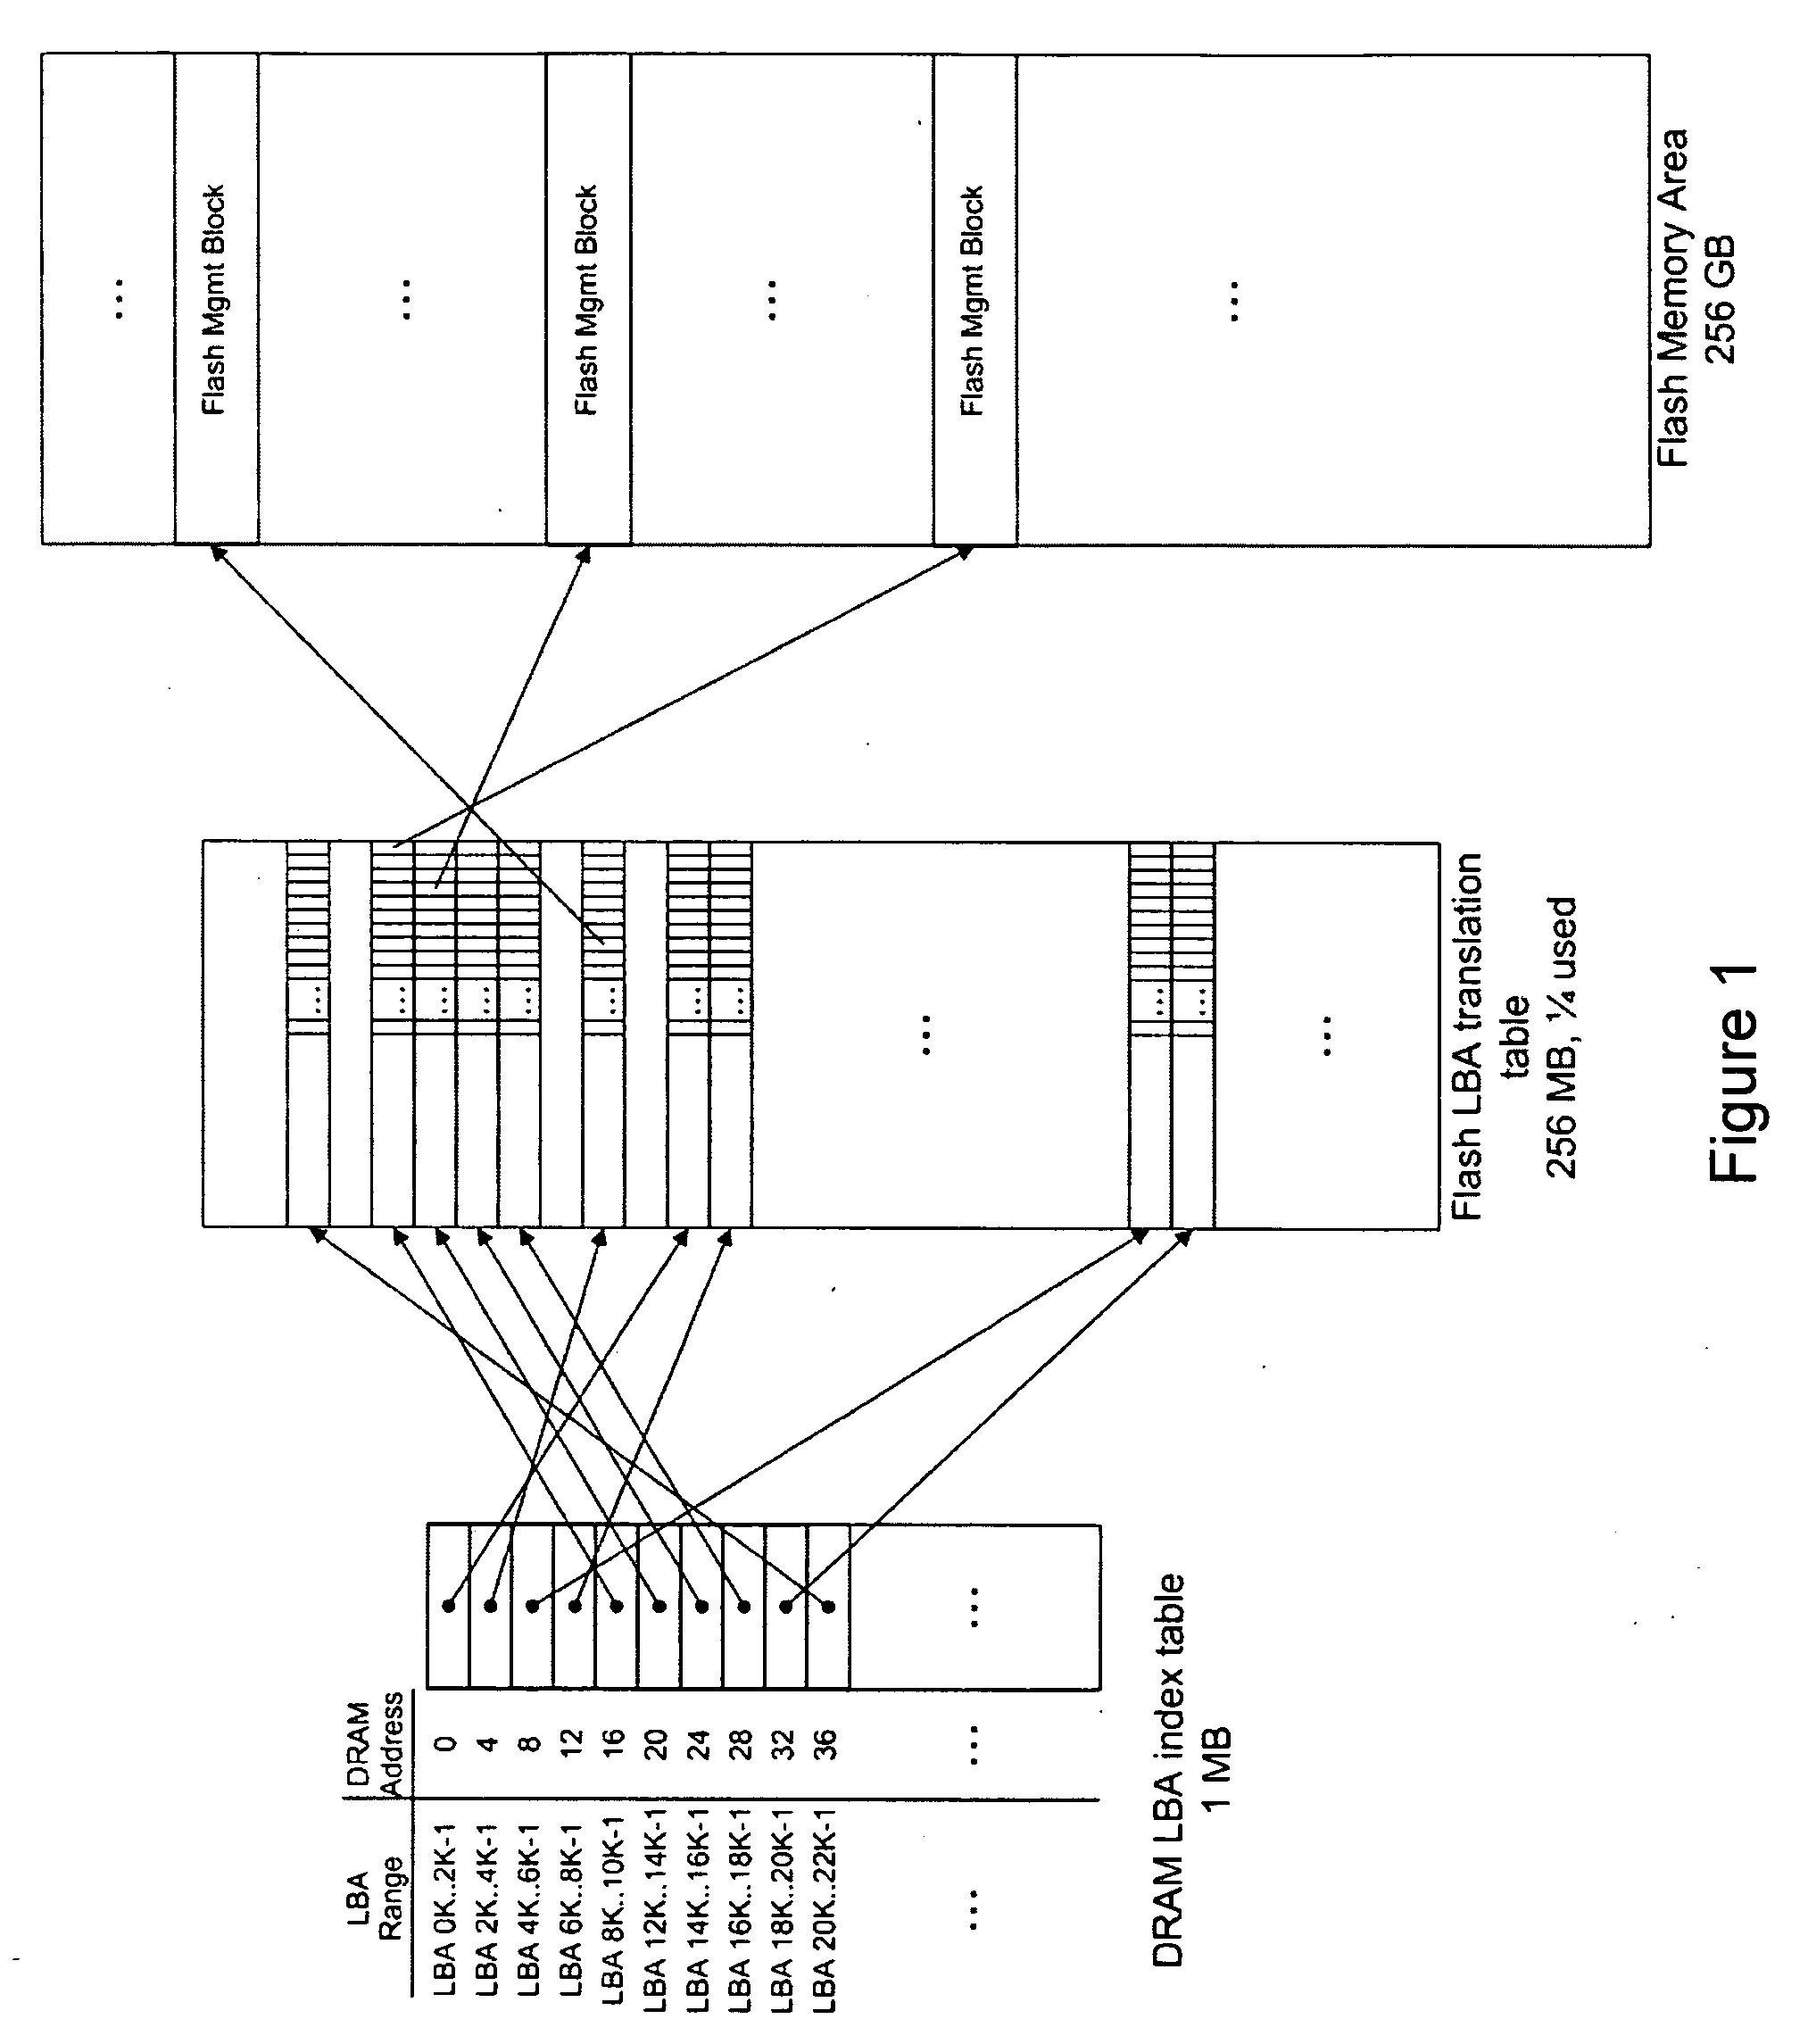 Process and Method for Logical-to-Physical Address Mapping in Solid Sate Disks